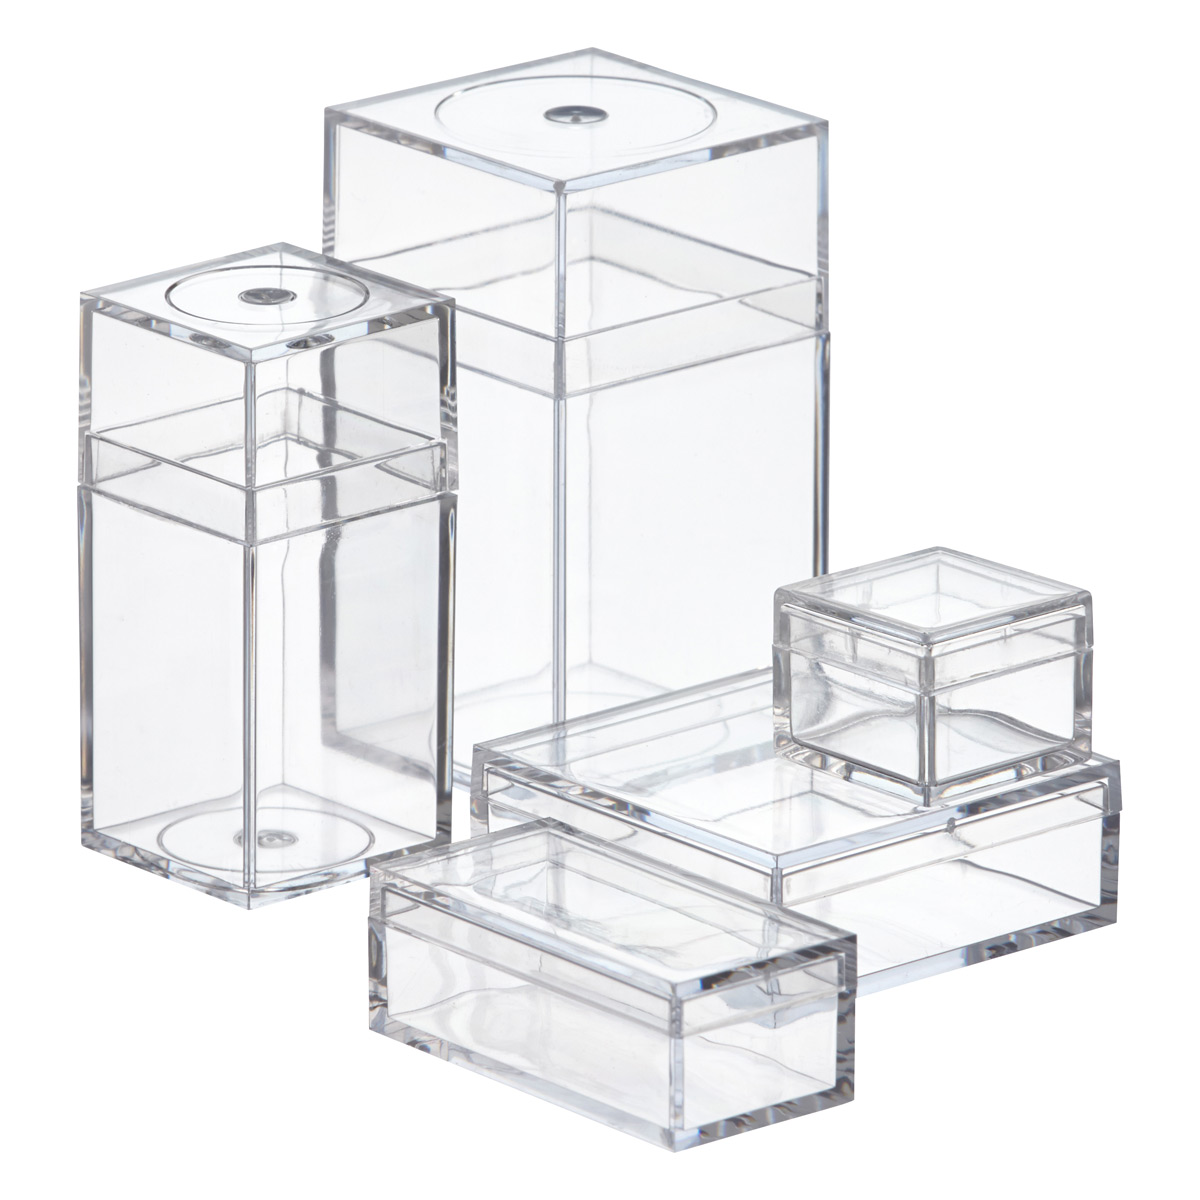 Amac Medium Goodie Bin with Scoop Clear, 4-1/2 x 3-9/16 x 3 H | The Container Store